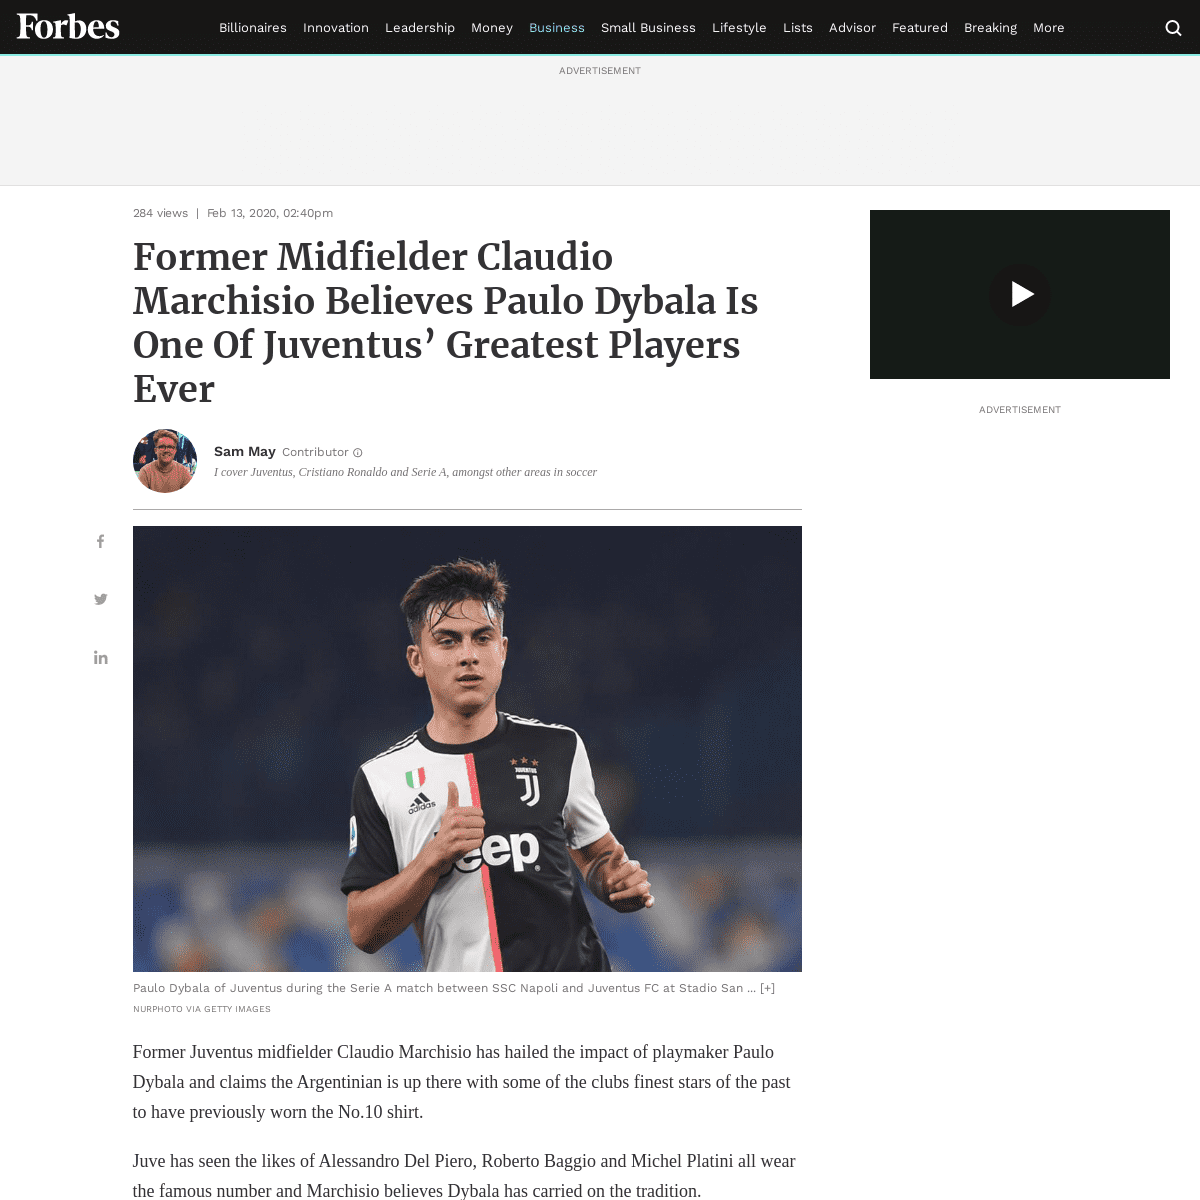 A complete backup of www.forbes.com/sites/sammay/2020/02/13/claudio-marchisio-former-midfielder-believes-paulo-dybala-is-one-of-